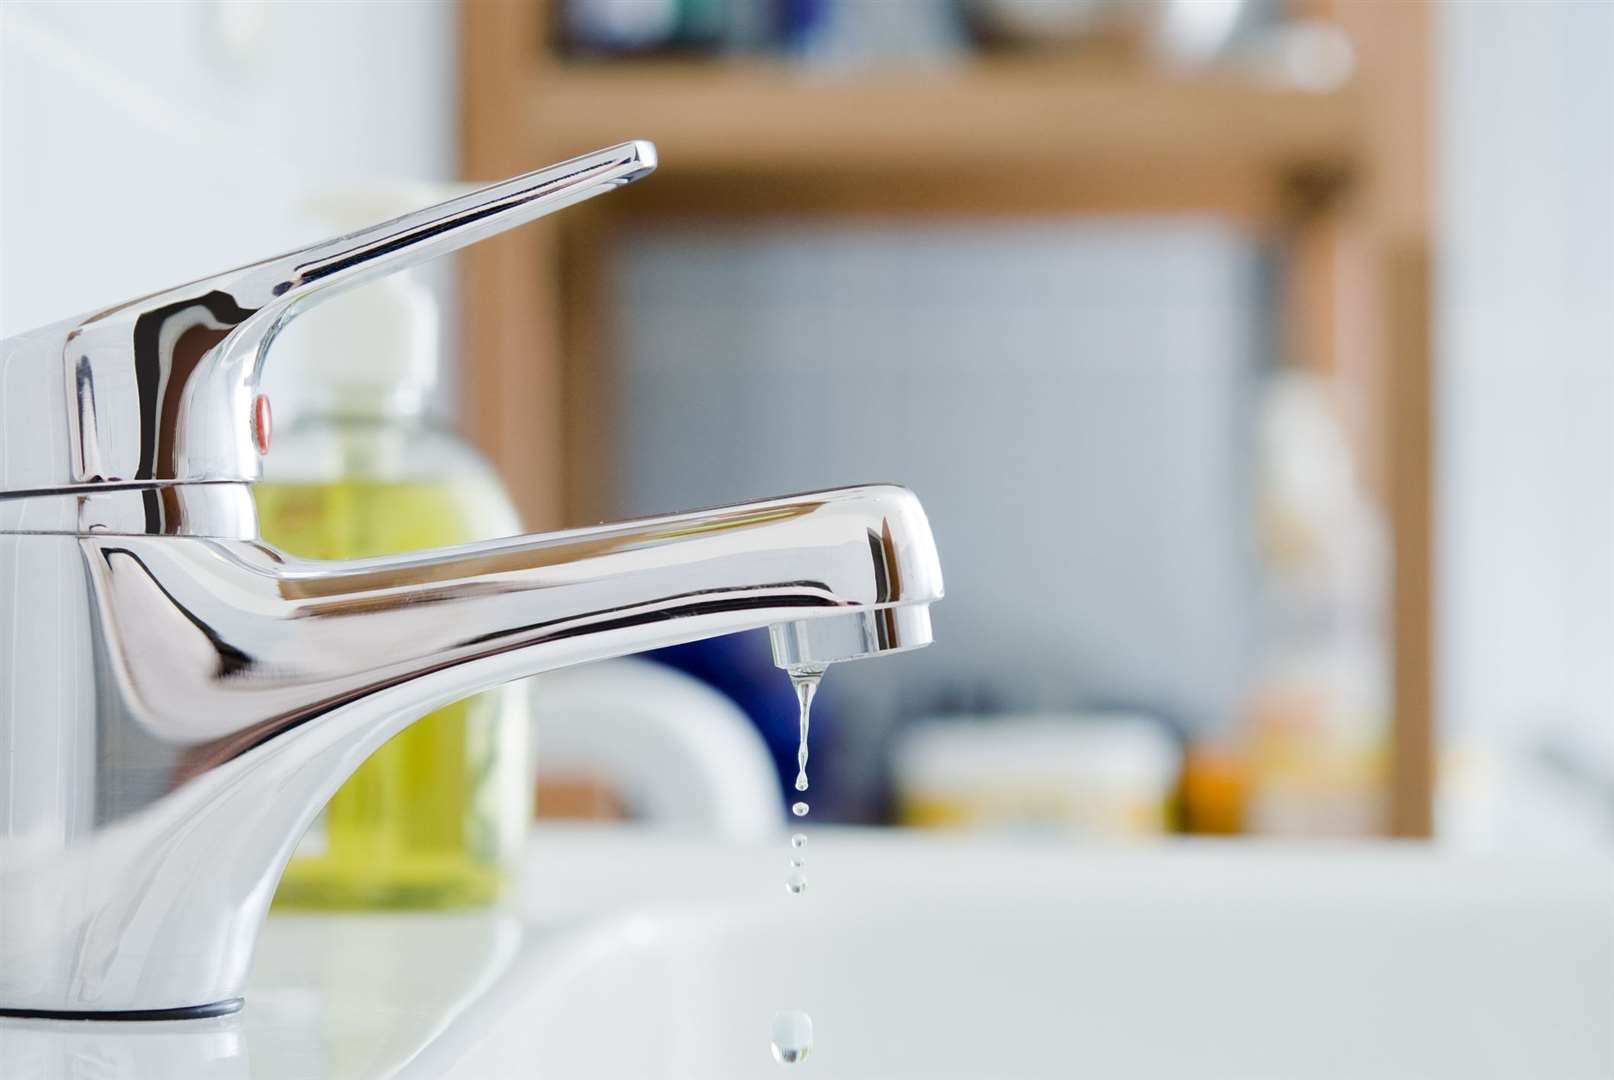 Households in Thanet have been left without water